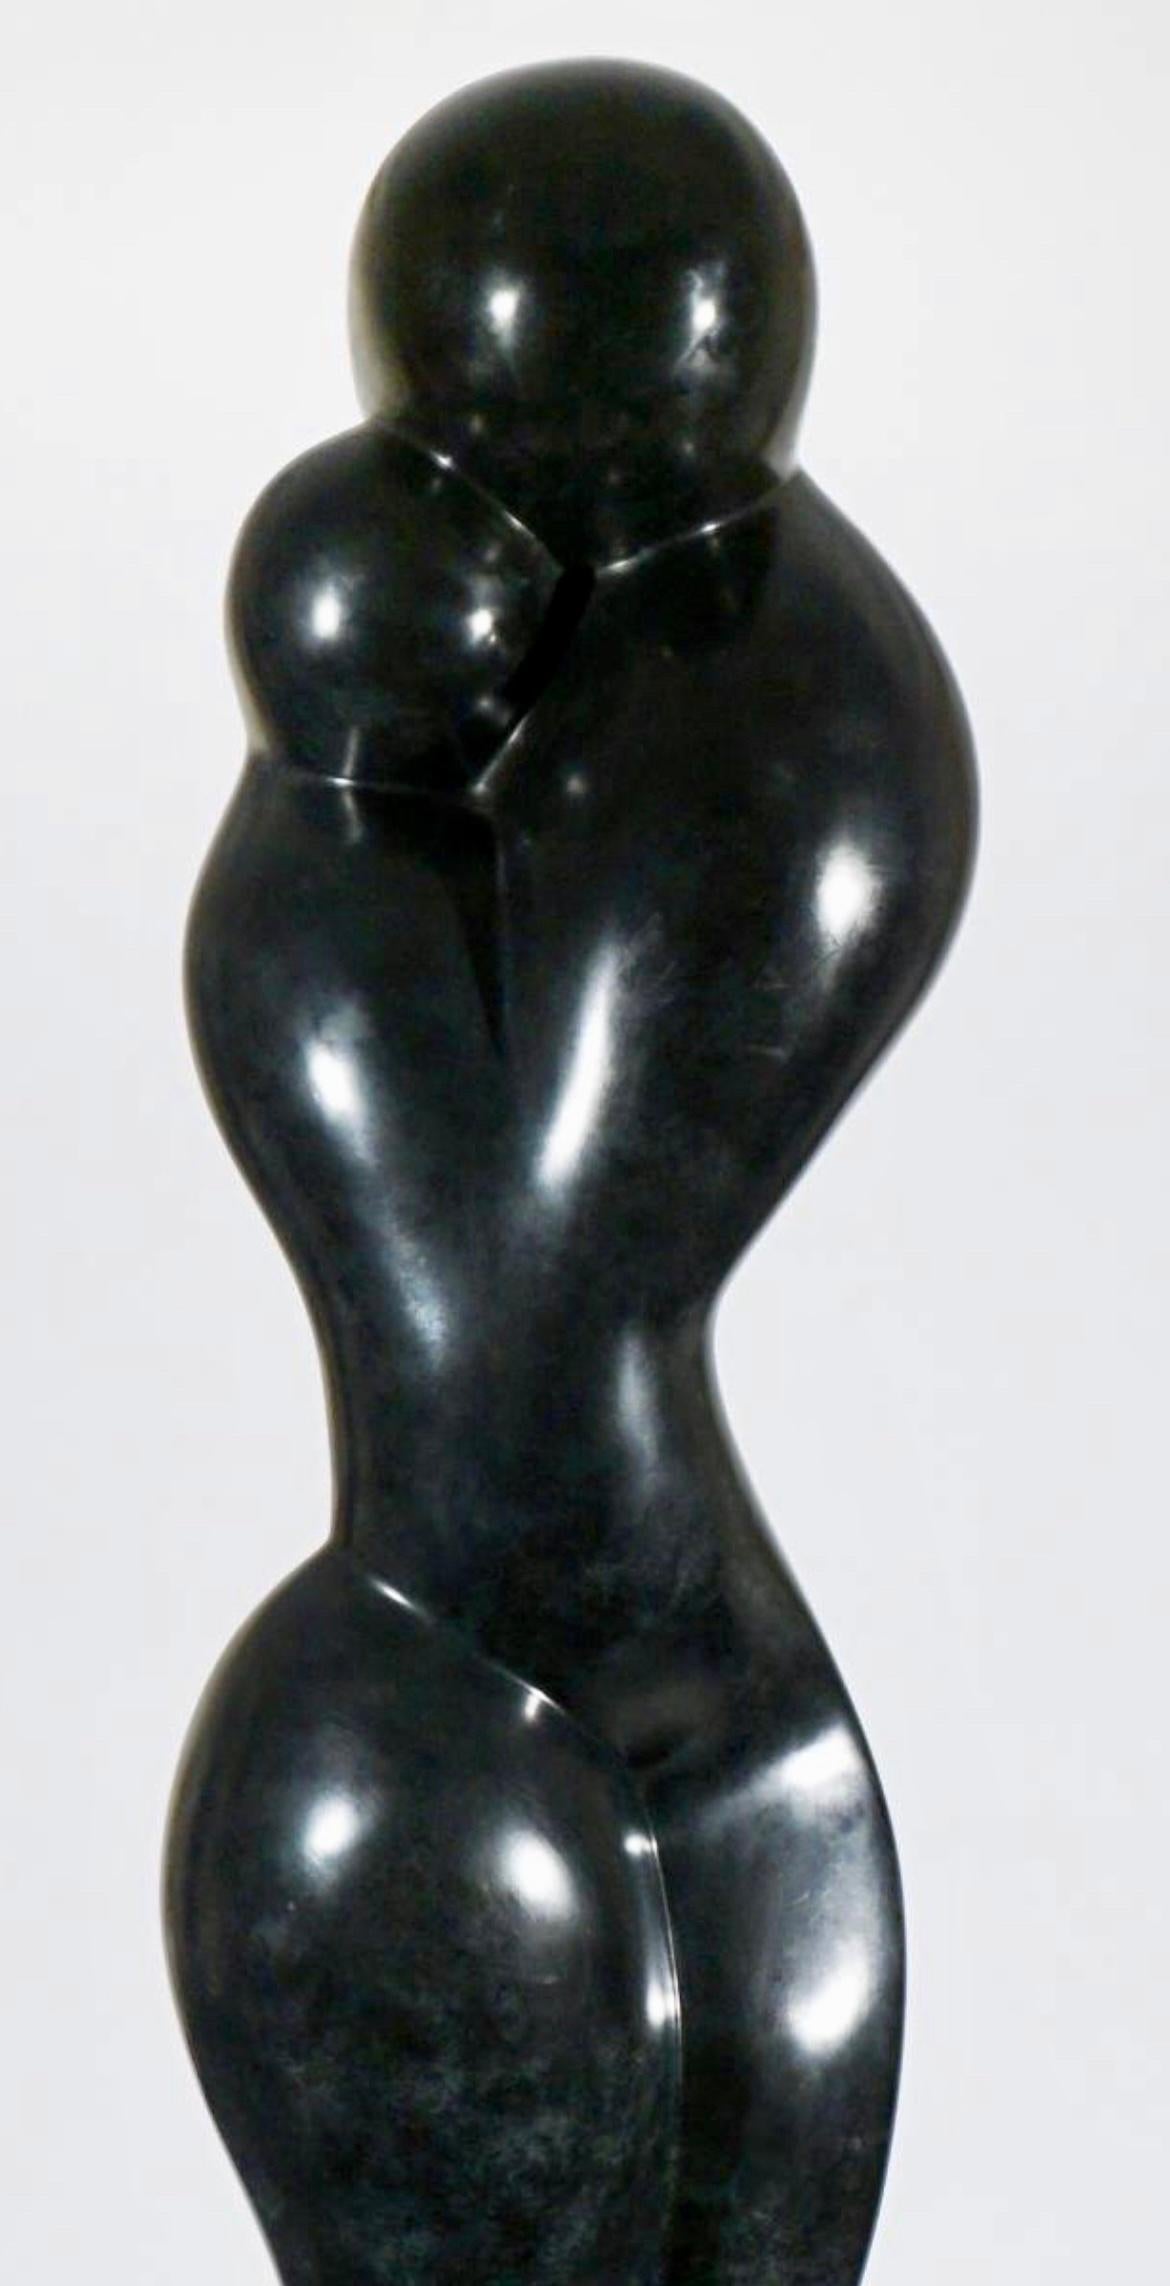 Mother and Child - Sculpture by Jim Ritchie